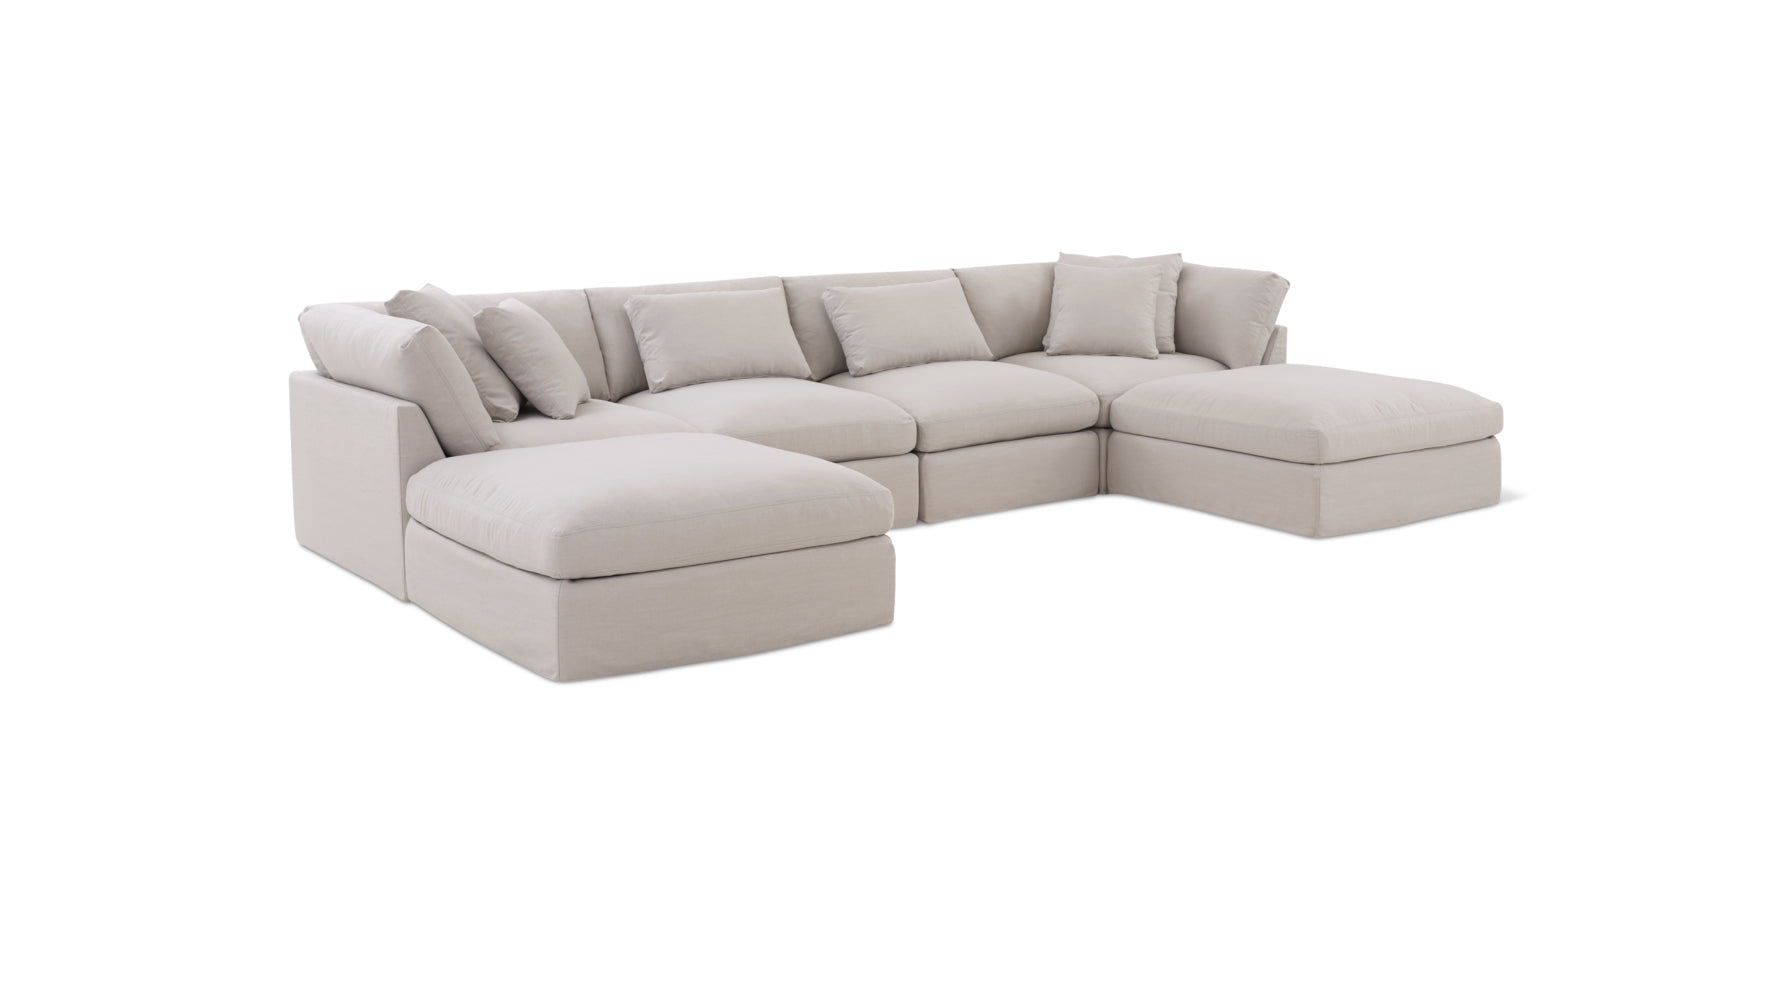 Get Together™ 6-Piece Modular U-Shaped Sectional, Large, Clay - Image 3